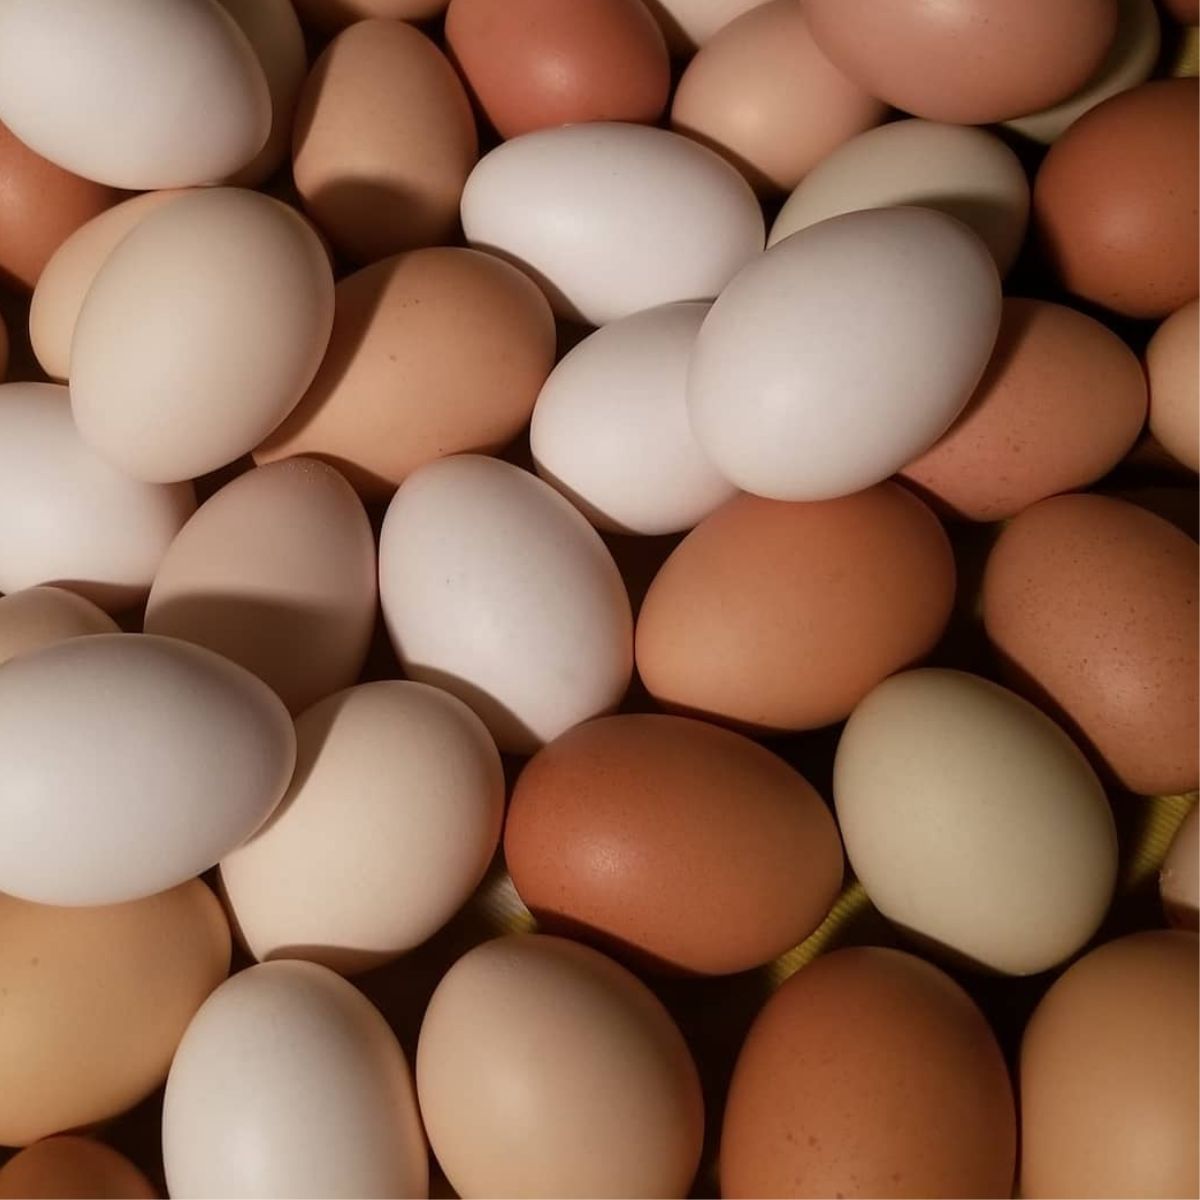 lots of colorful eggs